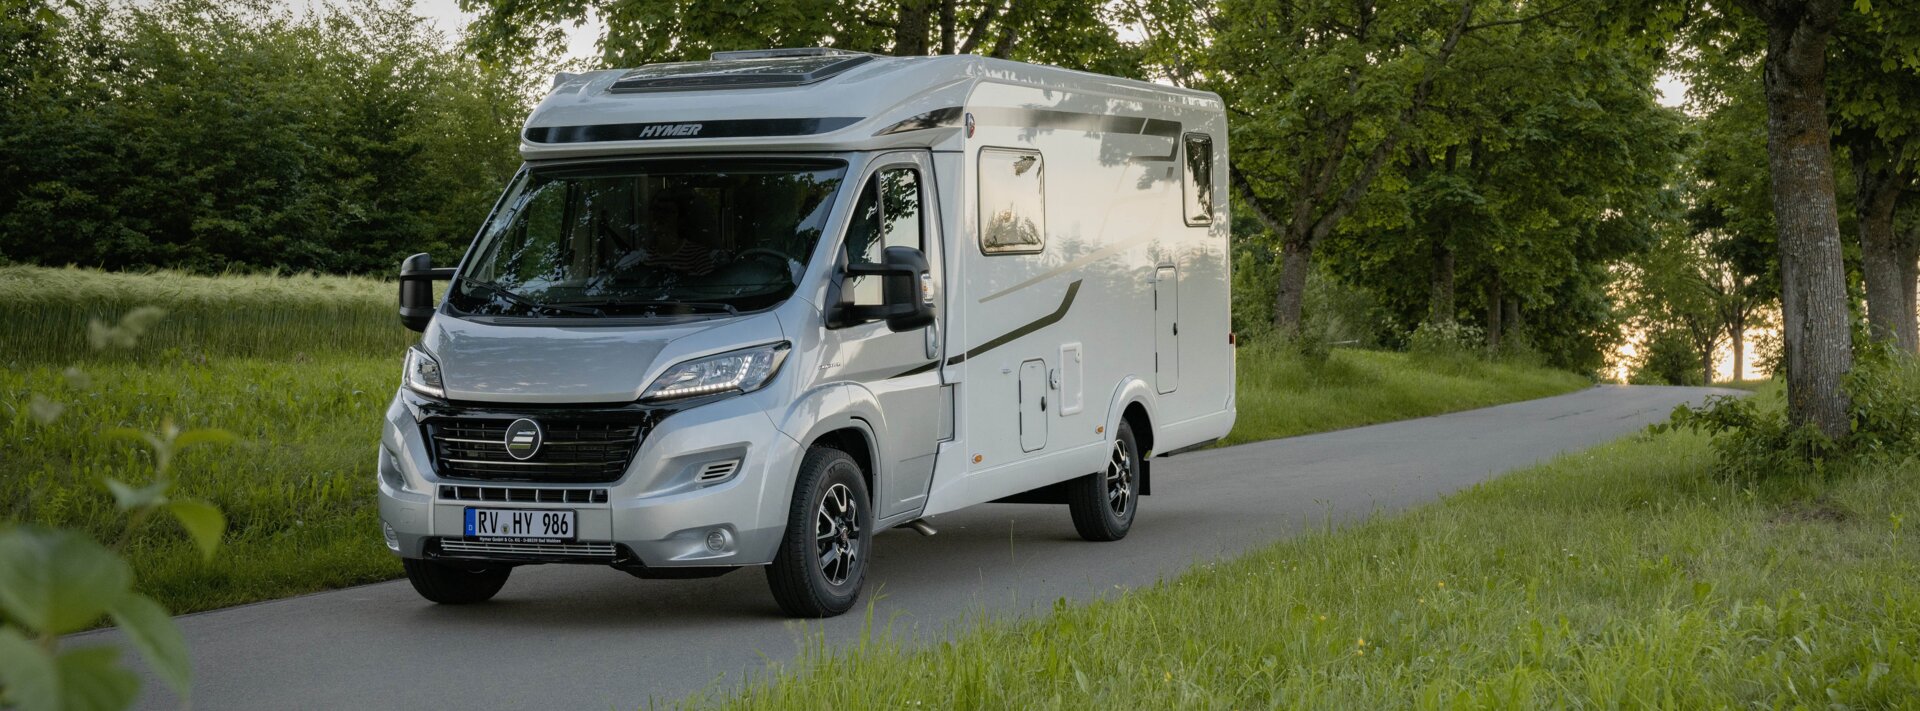 HYMER Exsis-t 580 on a narrow street amid trees and green meadows